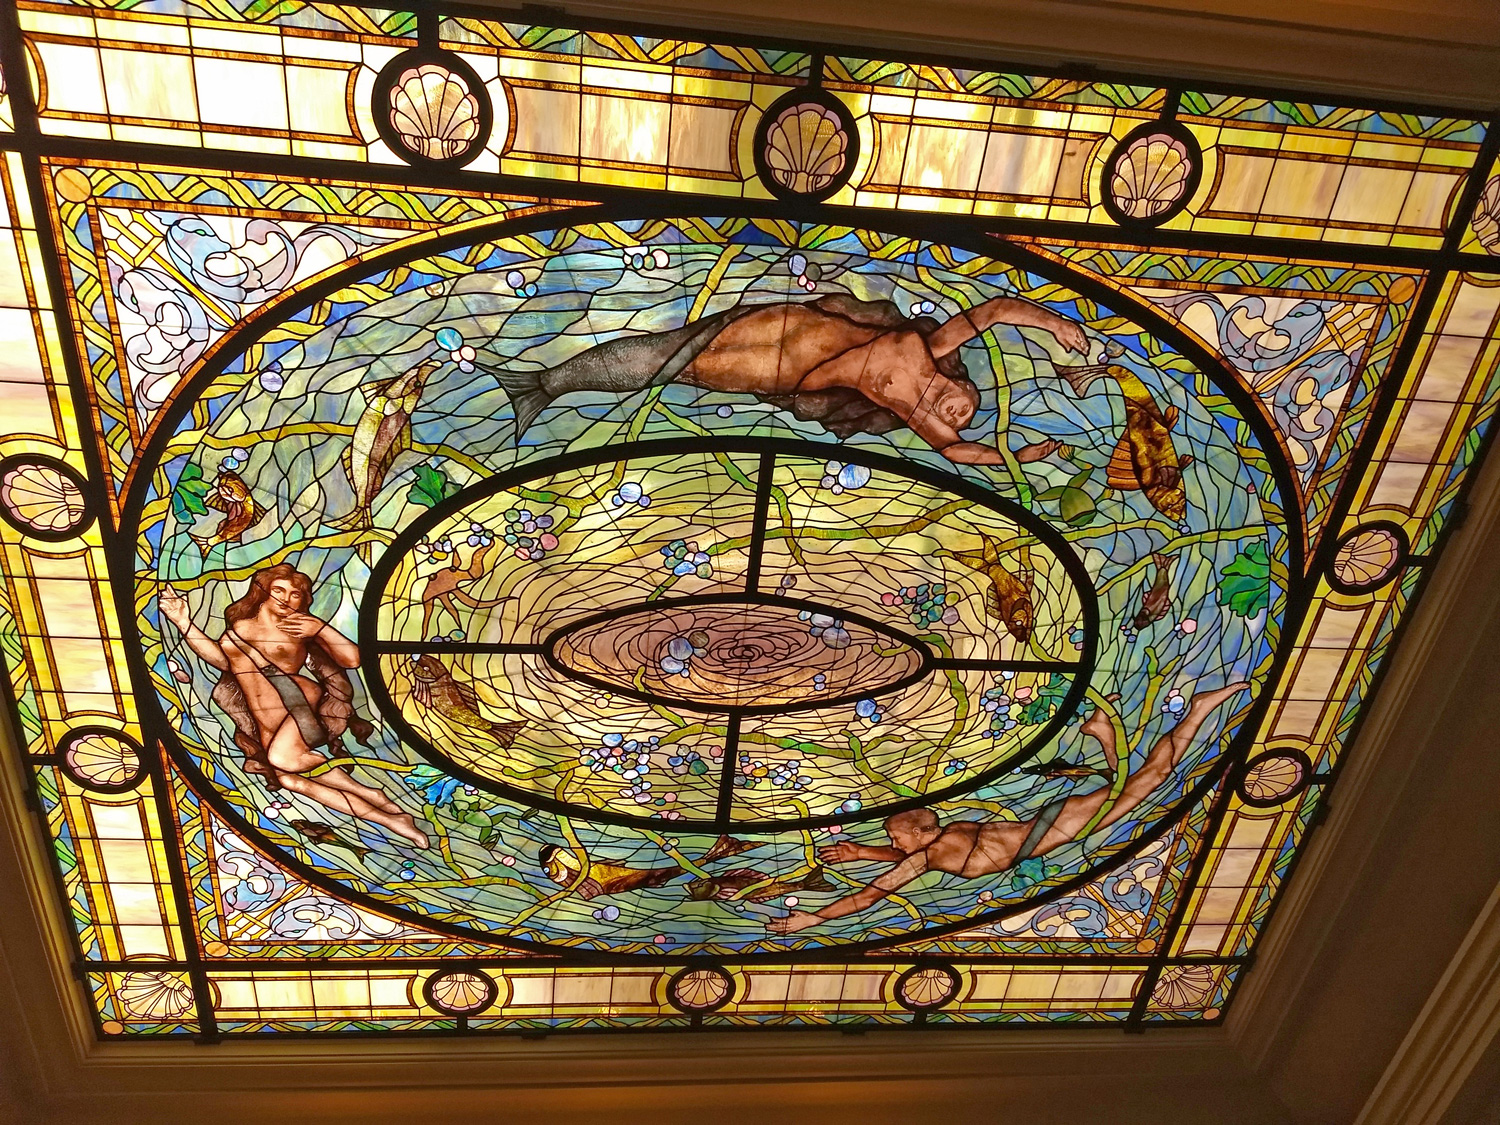 Colorful stained glass ceiling with mermaids, mermen